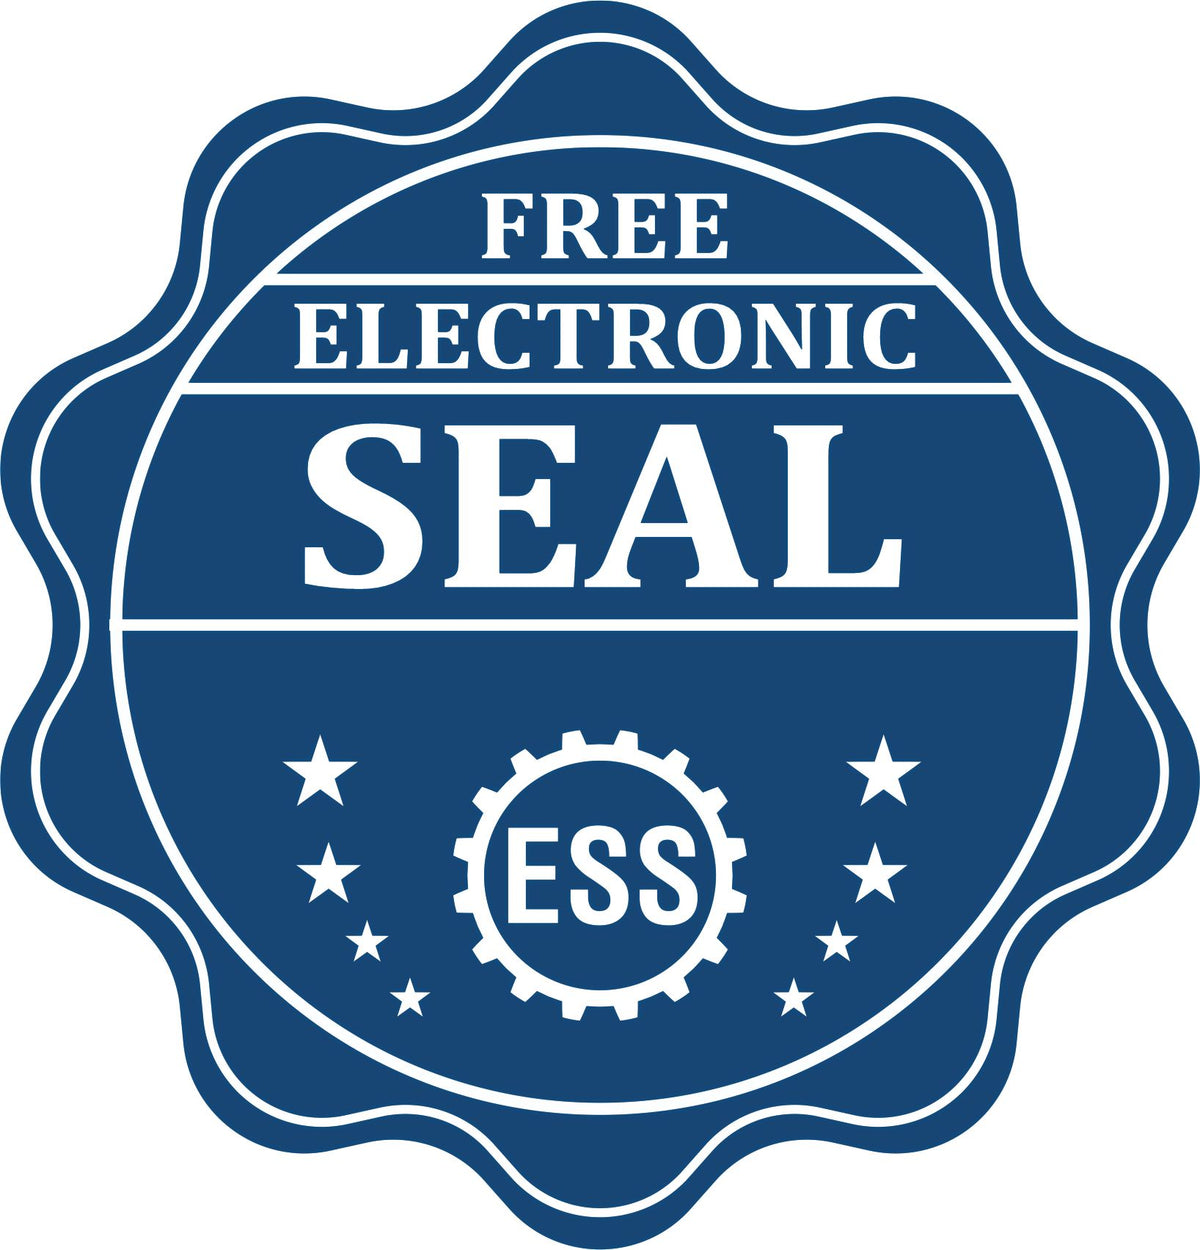 A badge showing a free electronic seal for the Missouri Desk Surveyor Seal Embosser with stars and the ESS gear on the emblem.